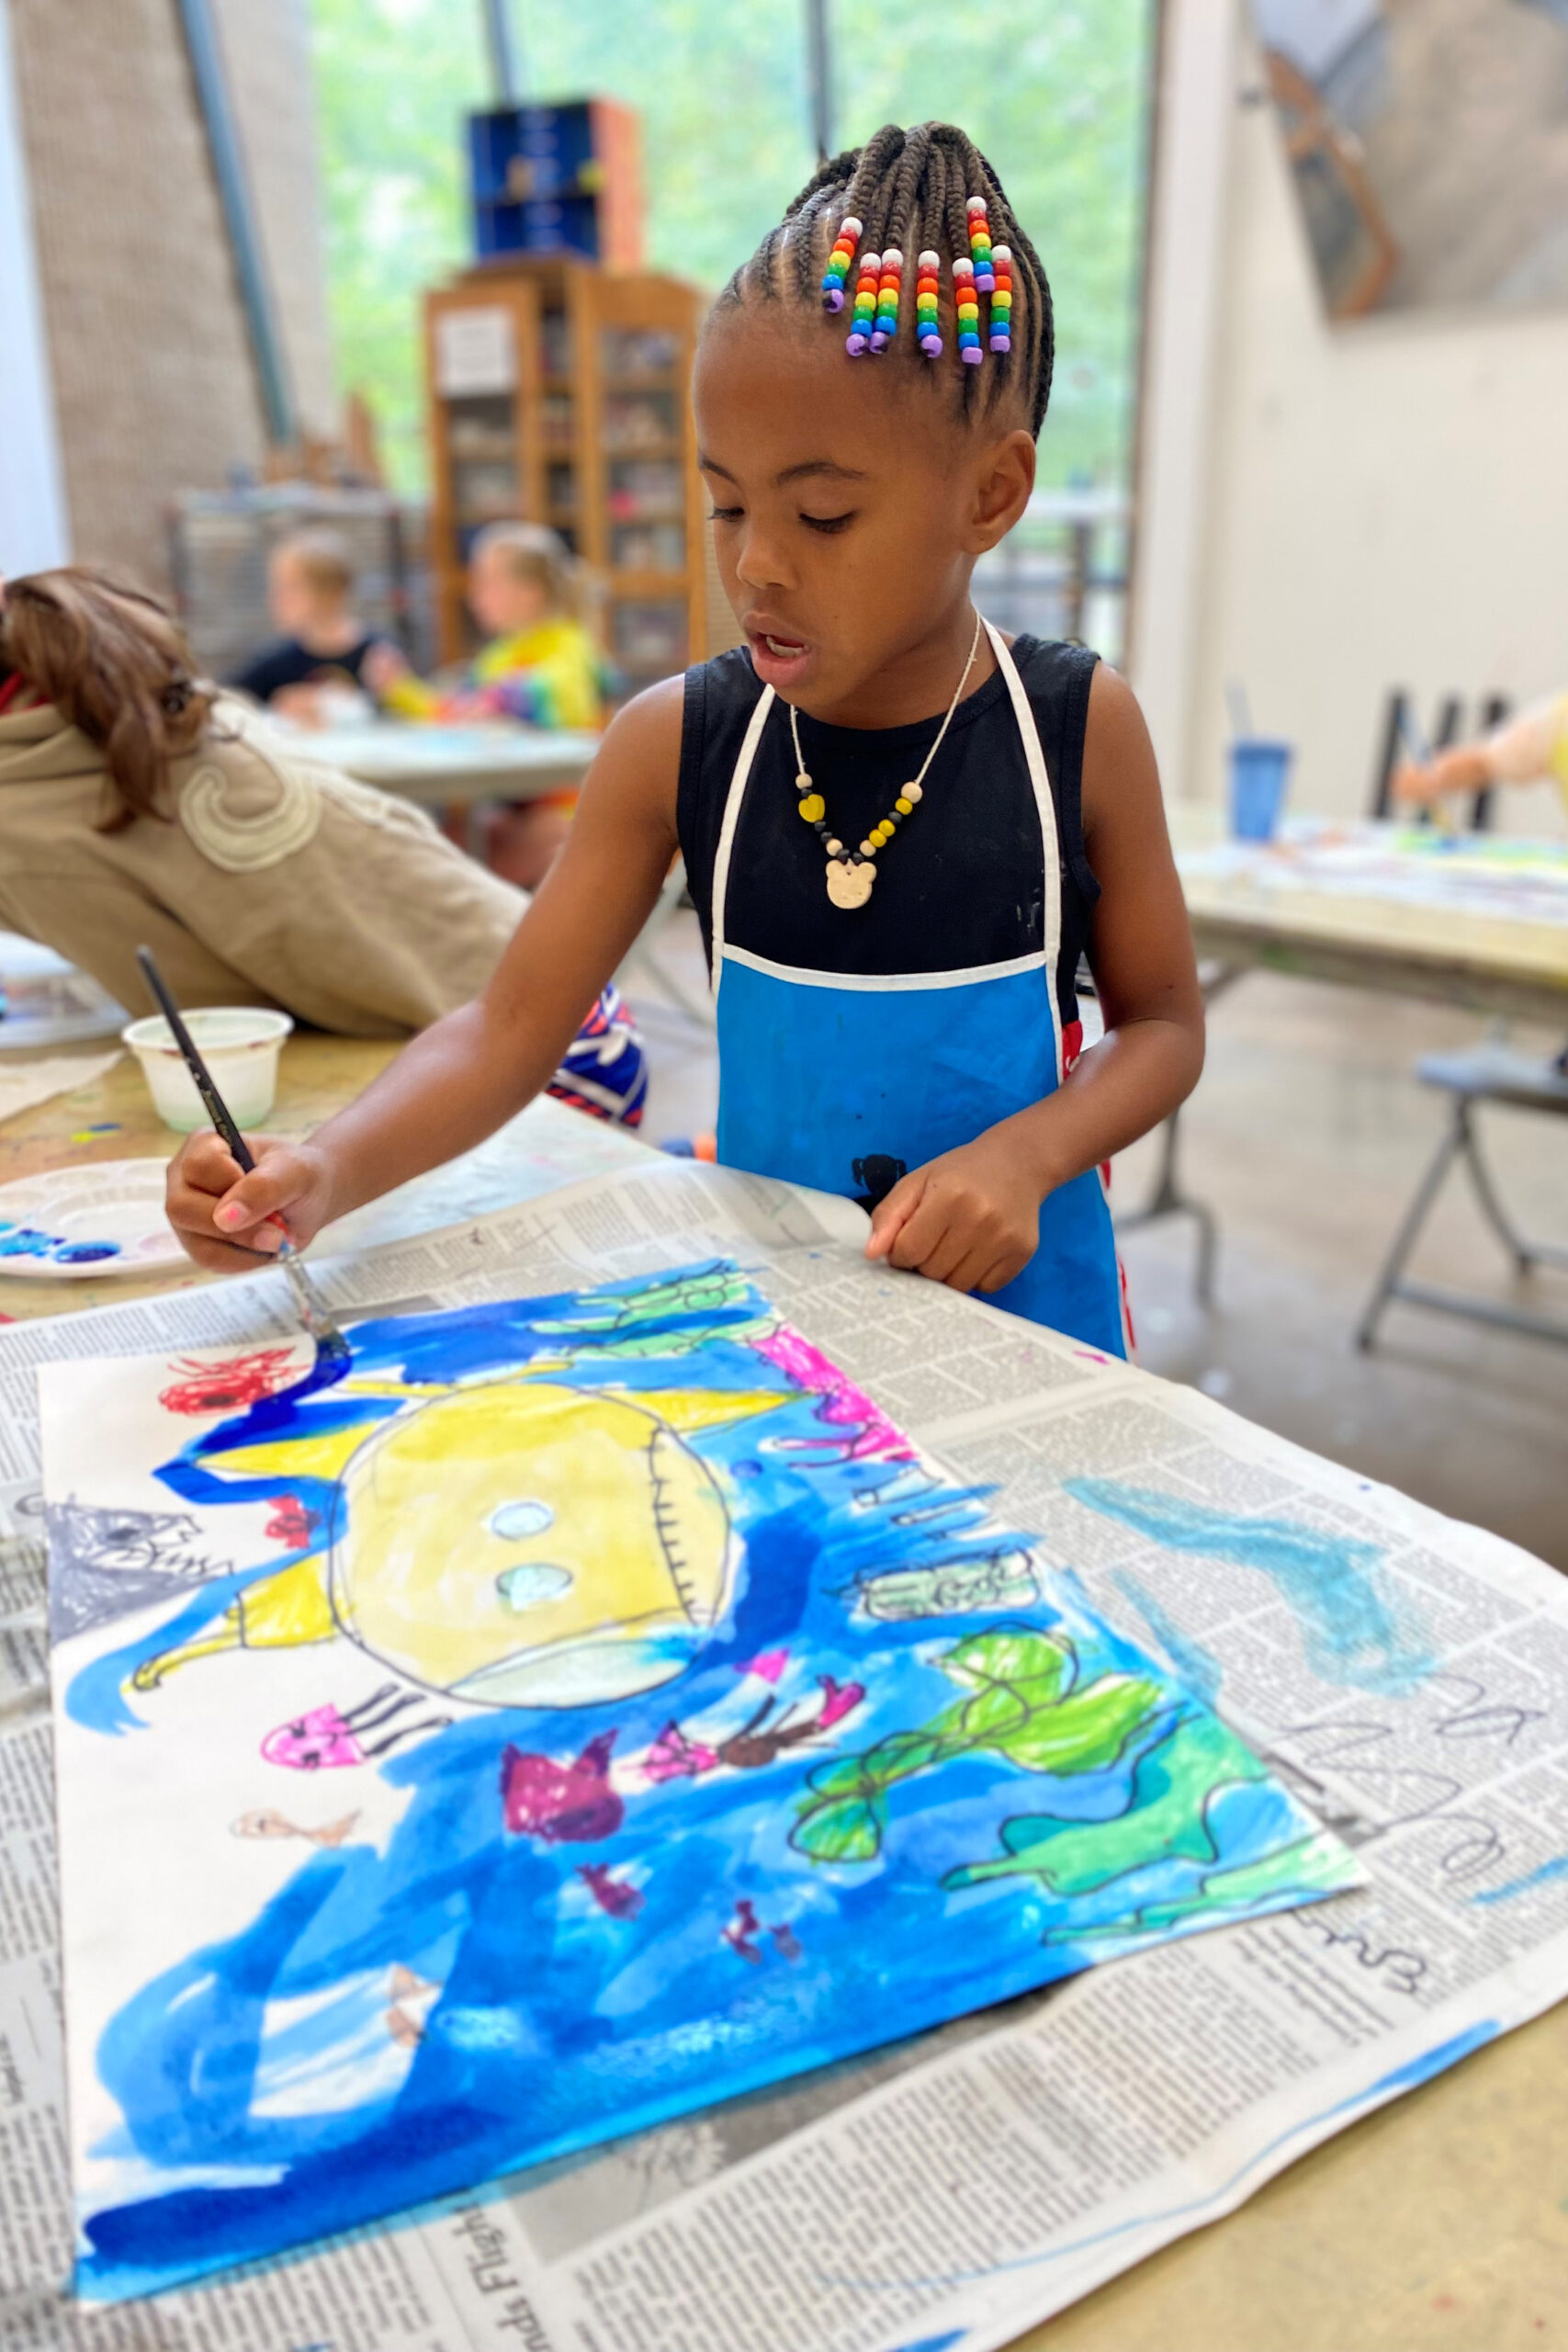 A child artist painting at the Art Center.